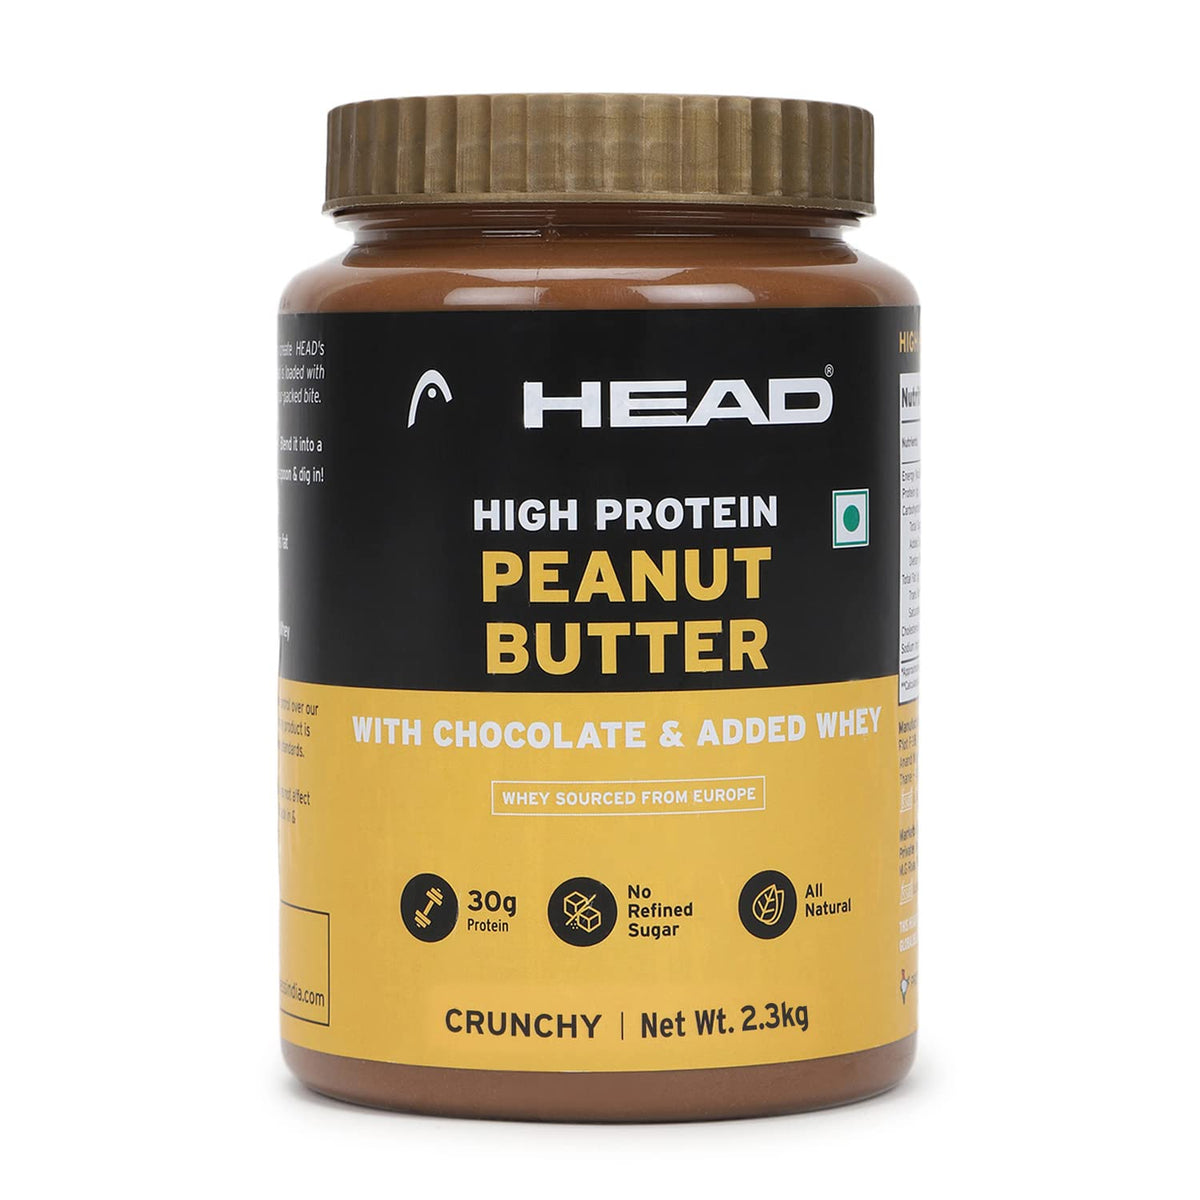 Head High Protein Peanut Butter (Chocolate, Crunchy, 2.3Kg) | 100% Pure Nuts | Added Whey | Protein Rich Nutritious Snack